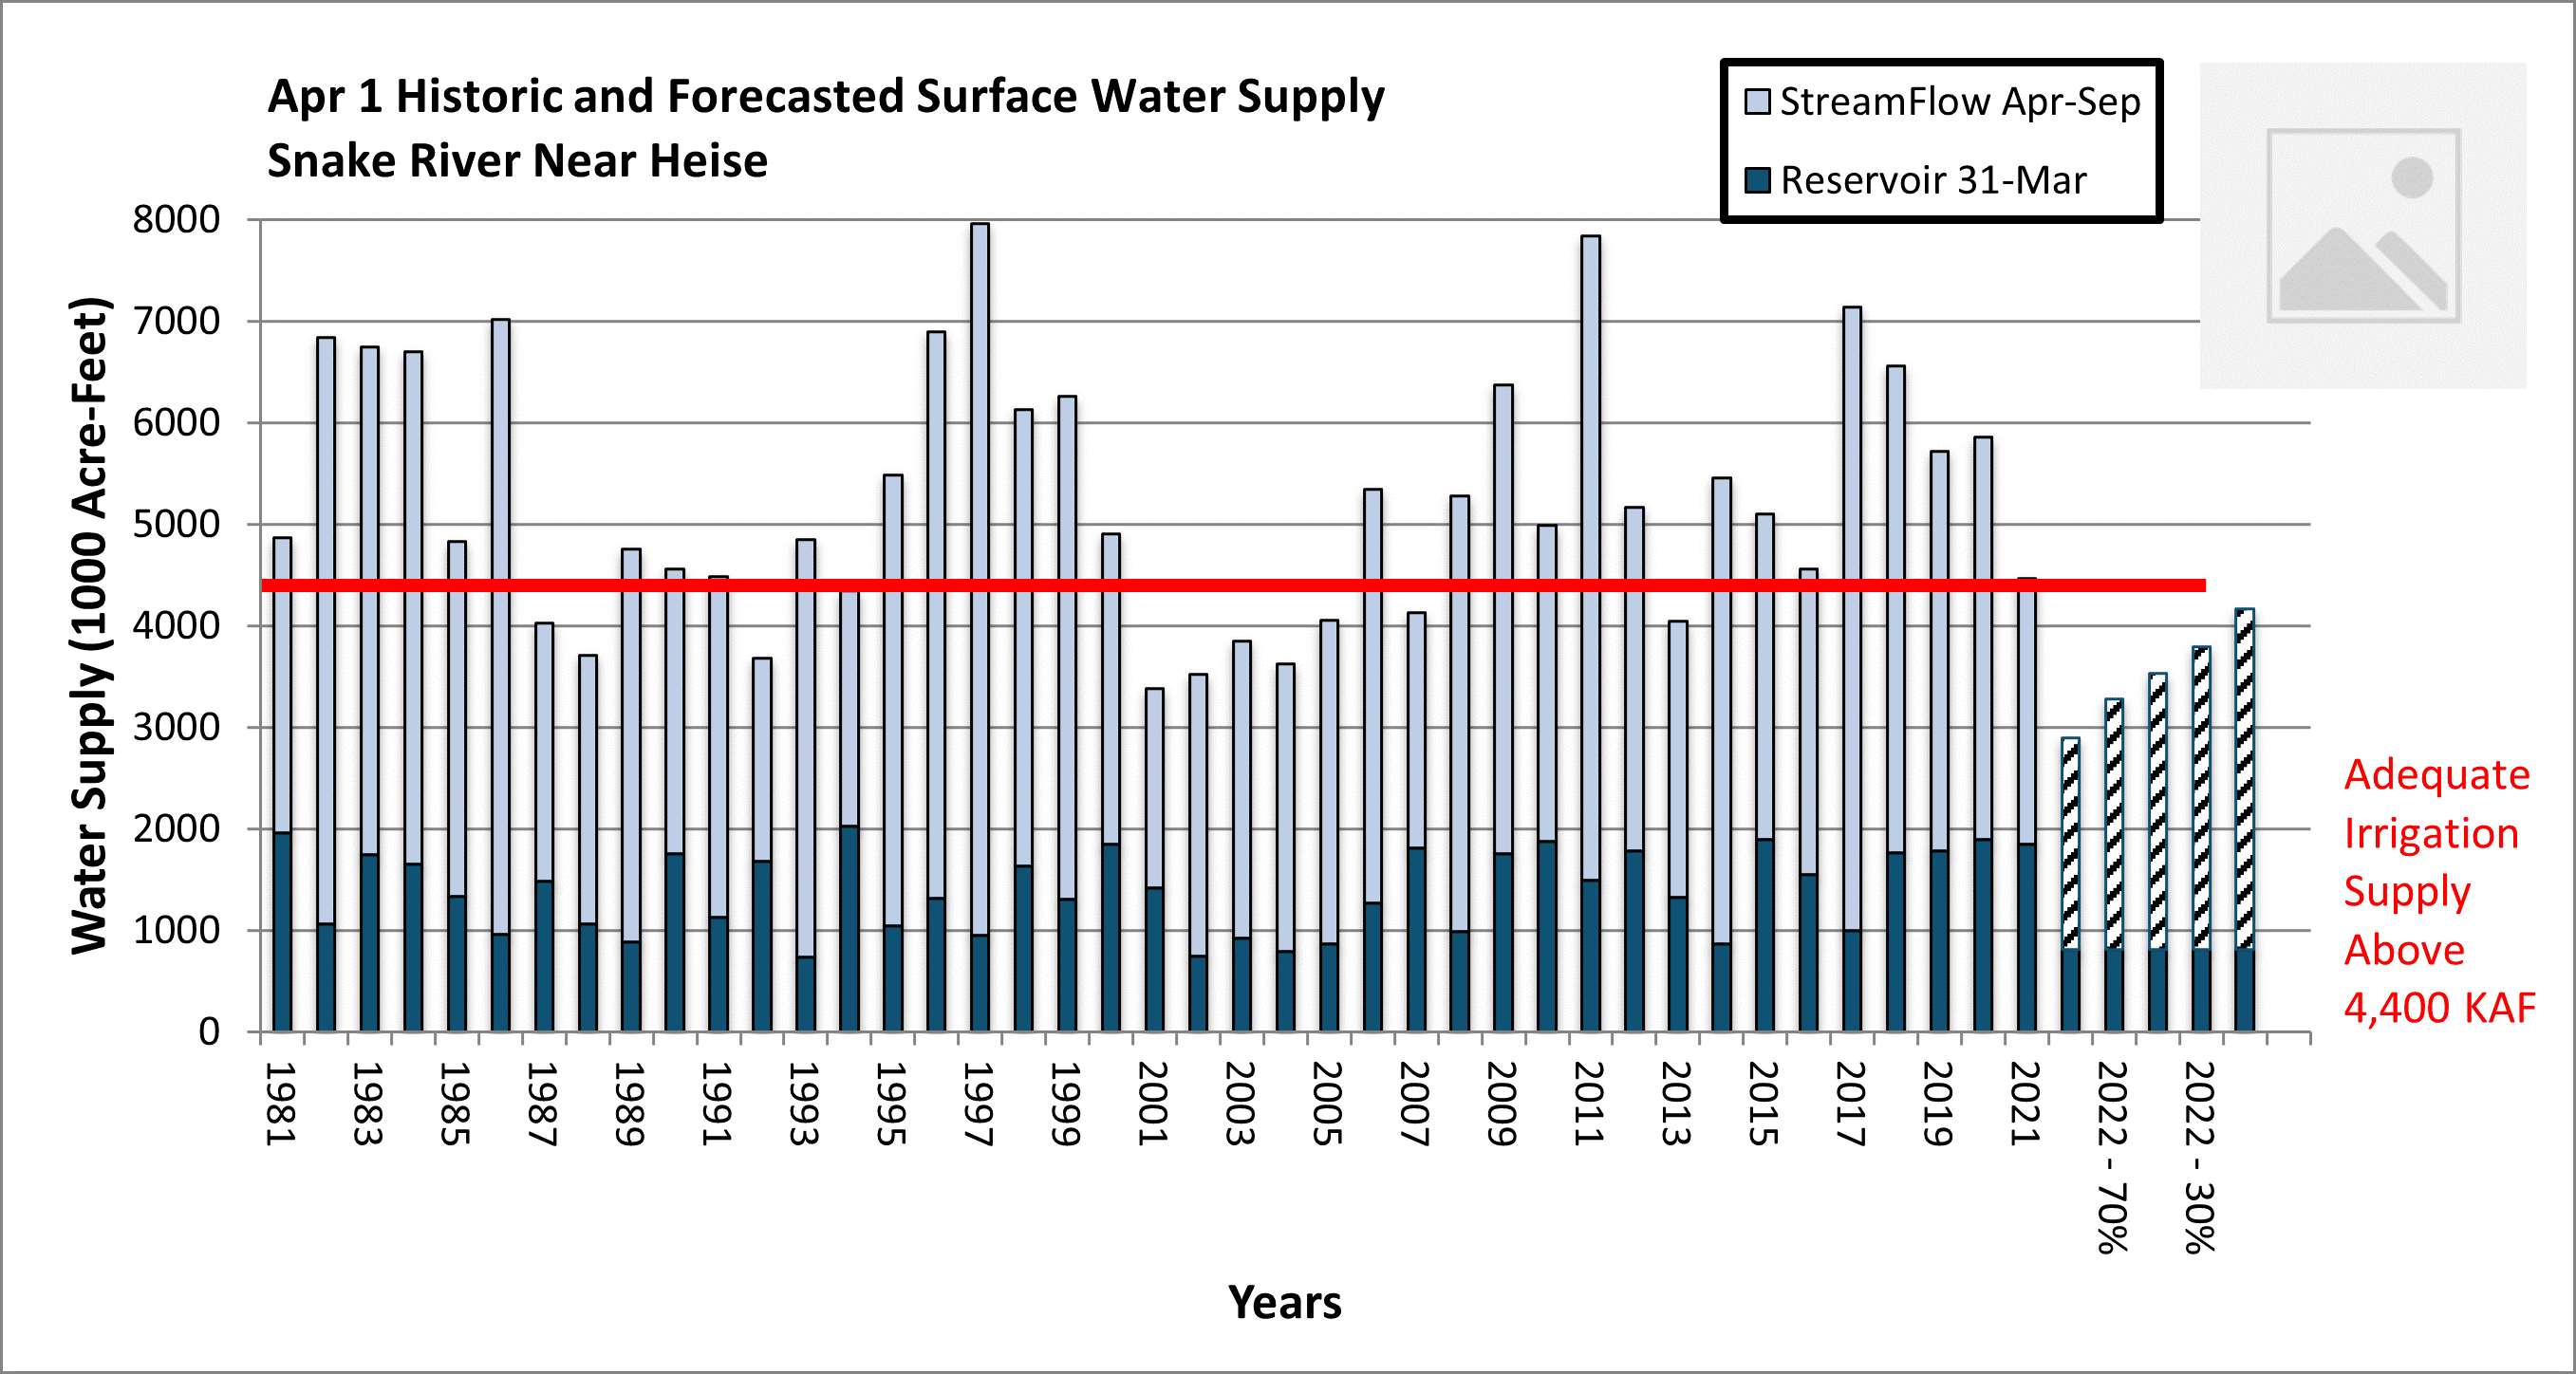 A graph of historic and forecasted Surface Water Supply for Snake River near Heise, Idaho shows the years from 1981 to 2021 on the x-axis and water supply in 1000 acre-feet on the y-axis. Bars for each year show a combination of April through September unregulated streamflow in light blue stacked on March 31 reservoir levels for Jackson Lake and Palisades Reservoir in dark blue. A red line indicates the level of adequate irrigation supply (above 4,400 KAF). The last five bars show five potential scenarios for water supply in 2022. All scenarios result in below adequate irrigation supply. 